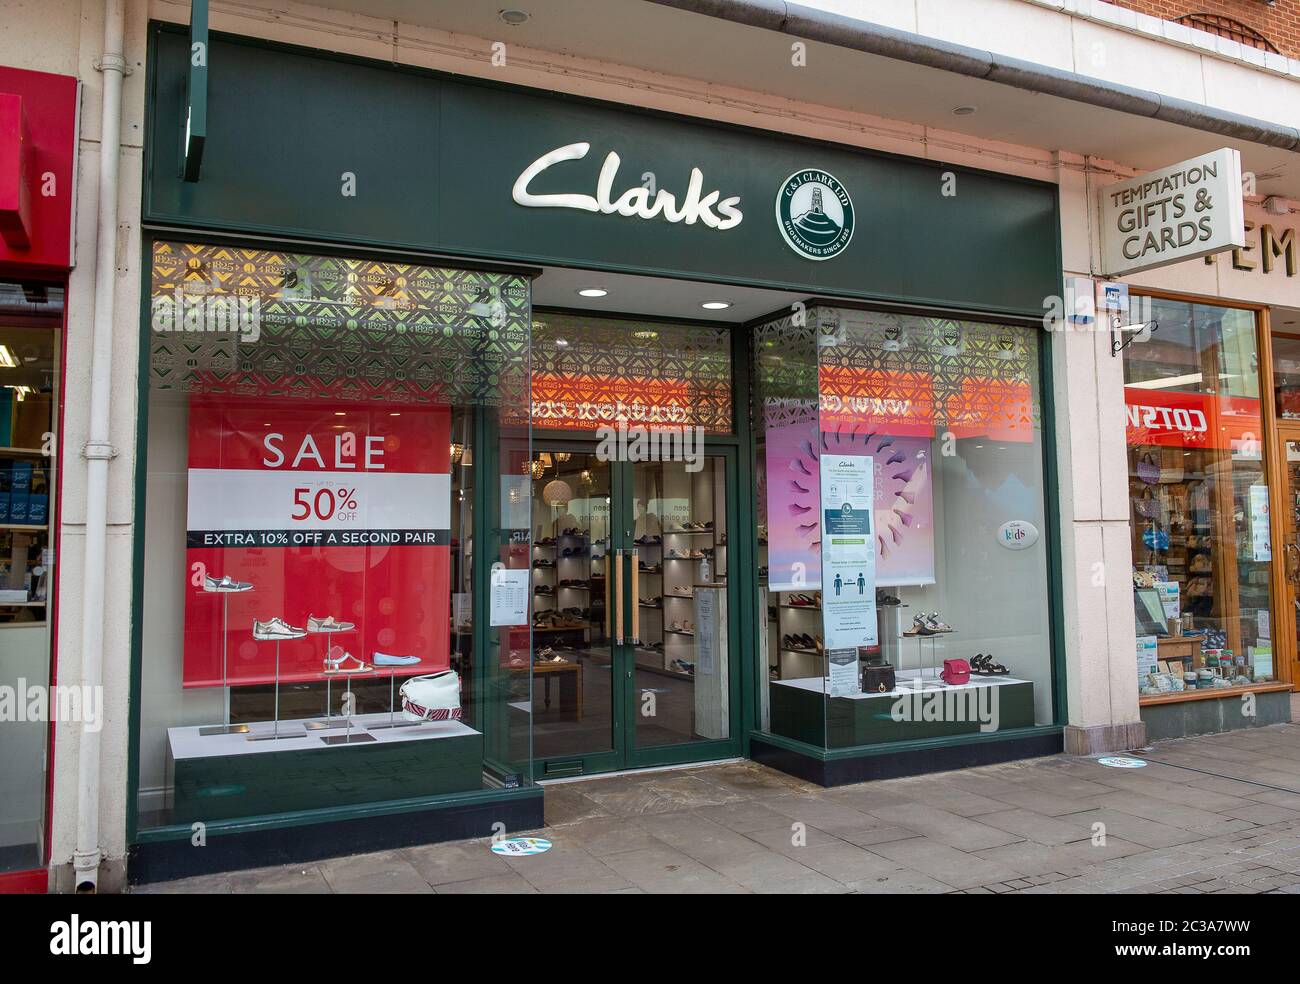 clarks shoes elephant and castle